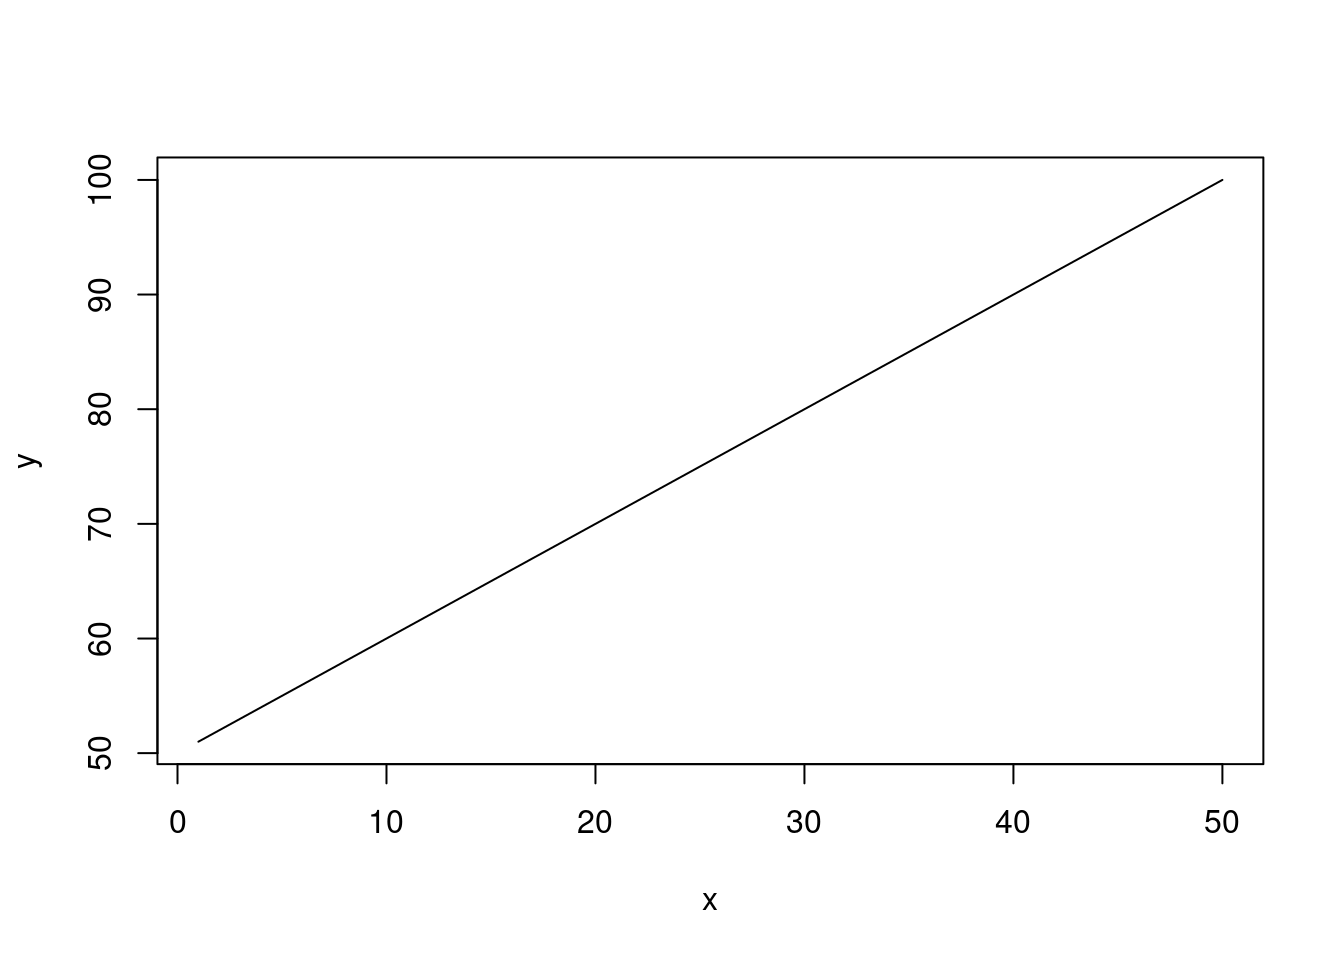 The same plot as above, but with a line graph instead